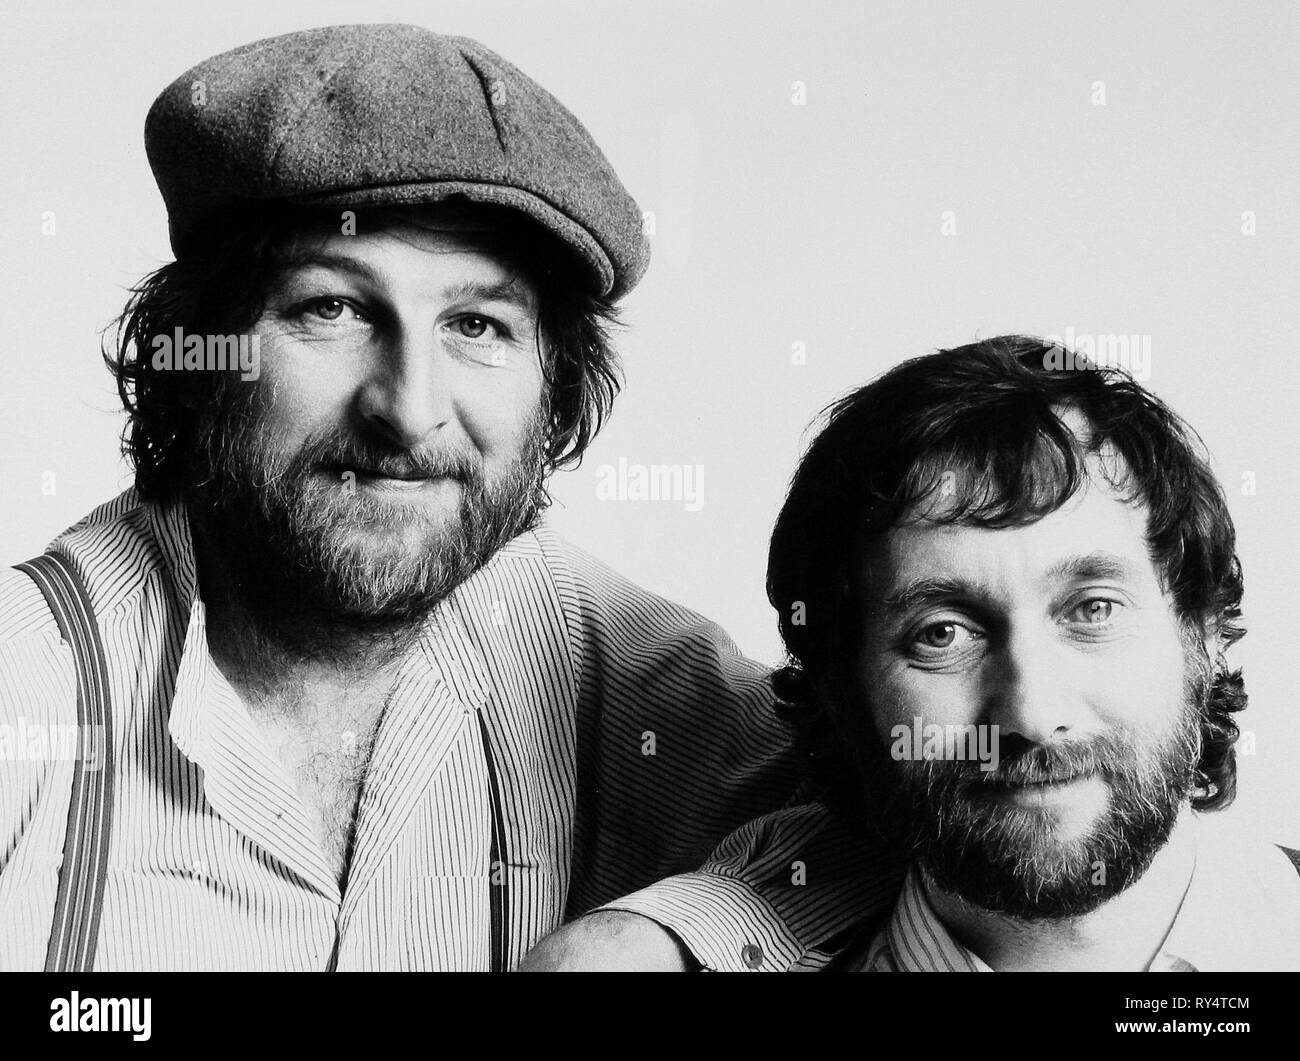 HODGES, CHAS, DAVE, Chas und Dave's Knie, 1983 Stockfoto